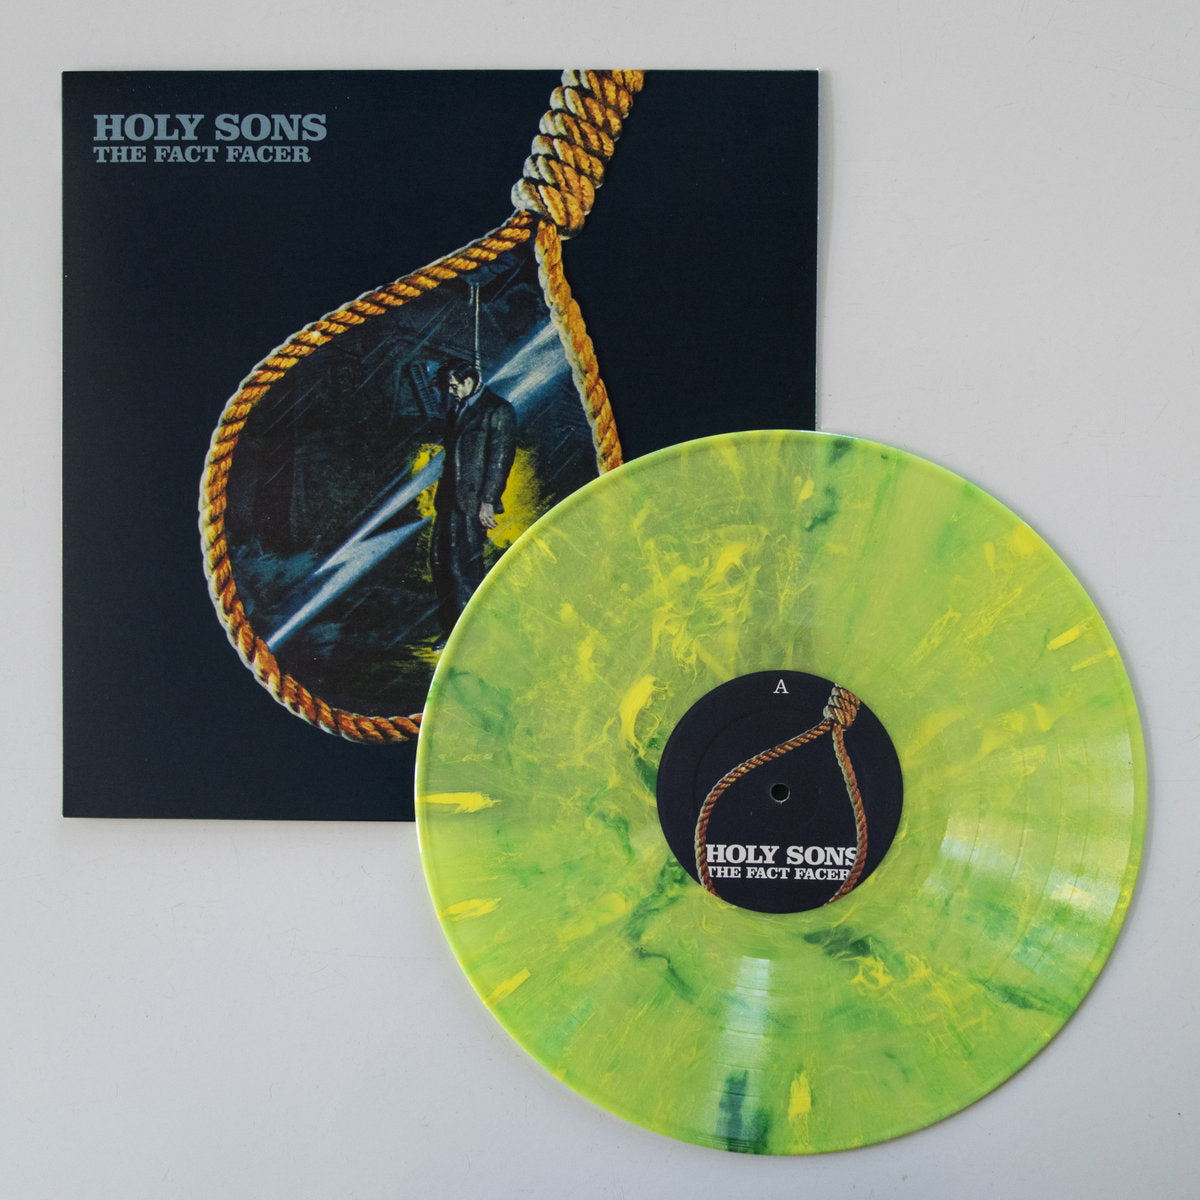 THE HOLY SONS - The Fact Facer - LP - 'Jaundice Colour' Vinyl